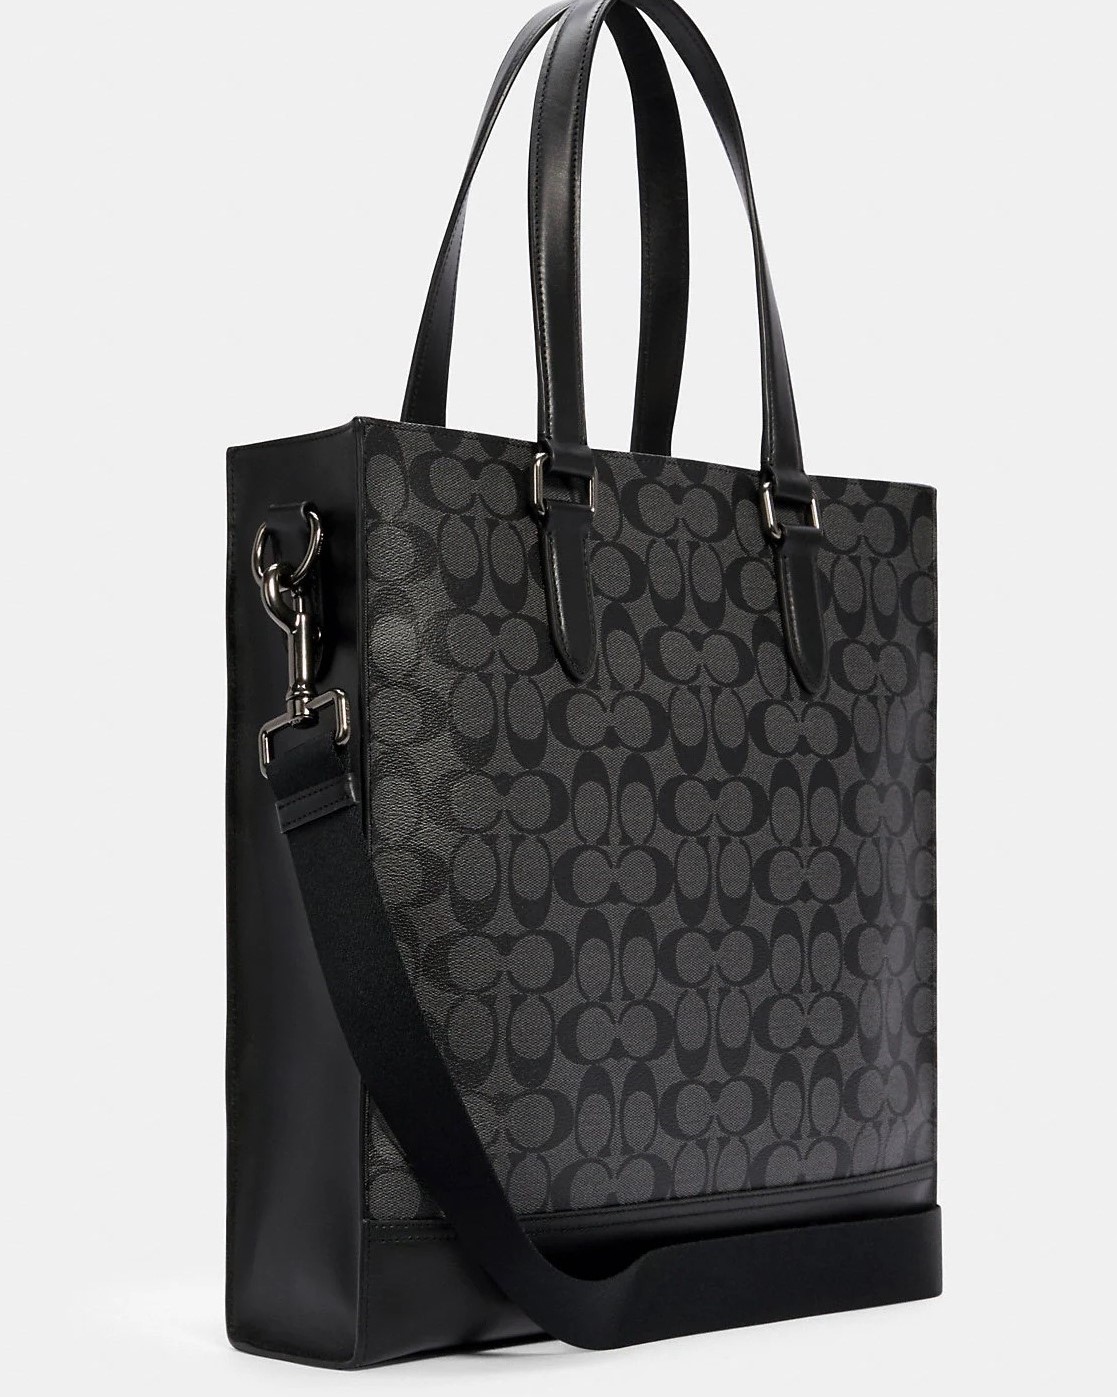 TÚI TOTE SIZE LỚN HỌA TIẾT COACH GRAHAM STRUCTURED TOTE IN GUNMETAL CHARCOAL BLACK SIGNATURE CANVAS C3232 2